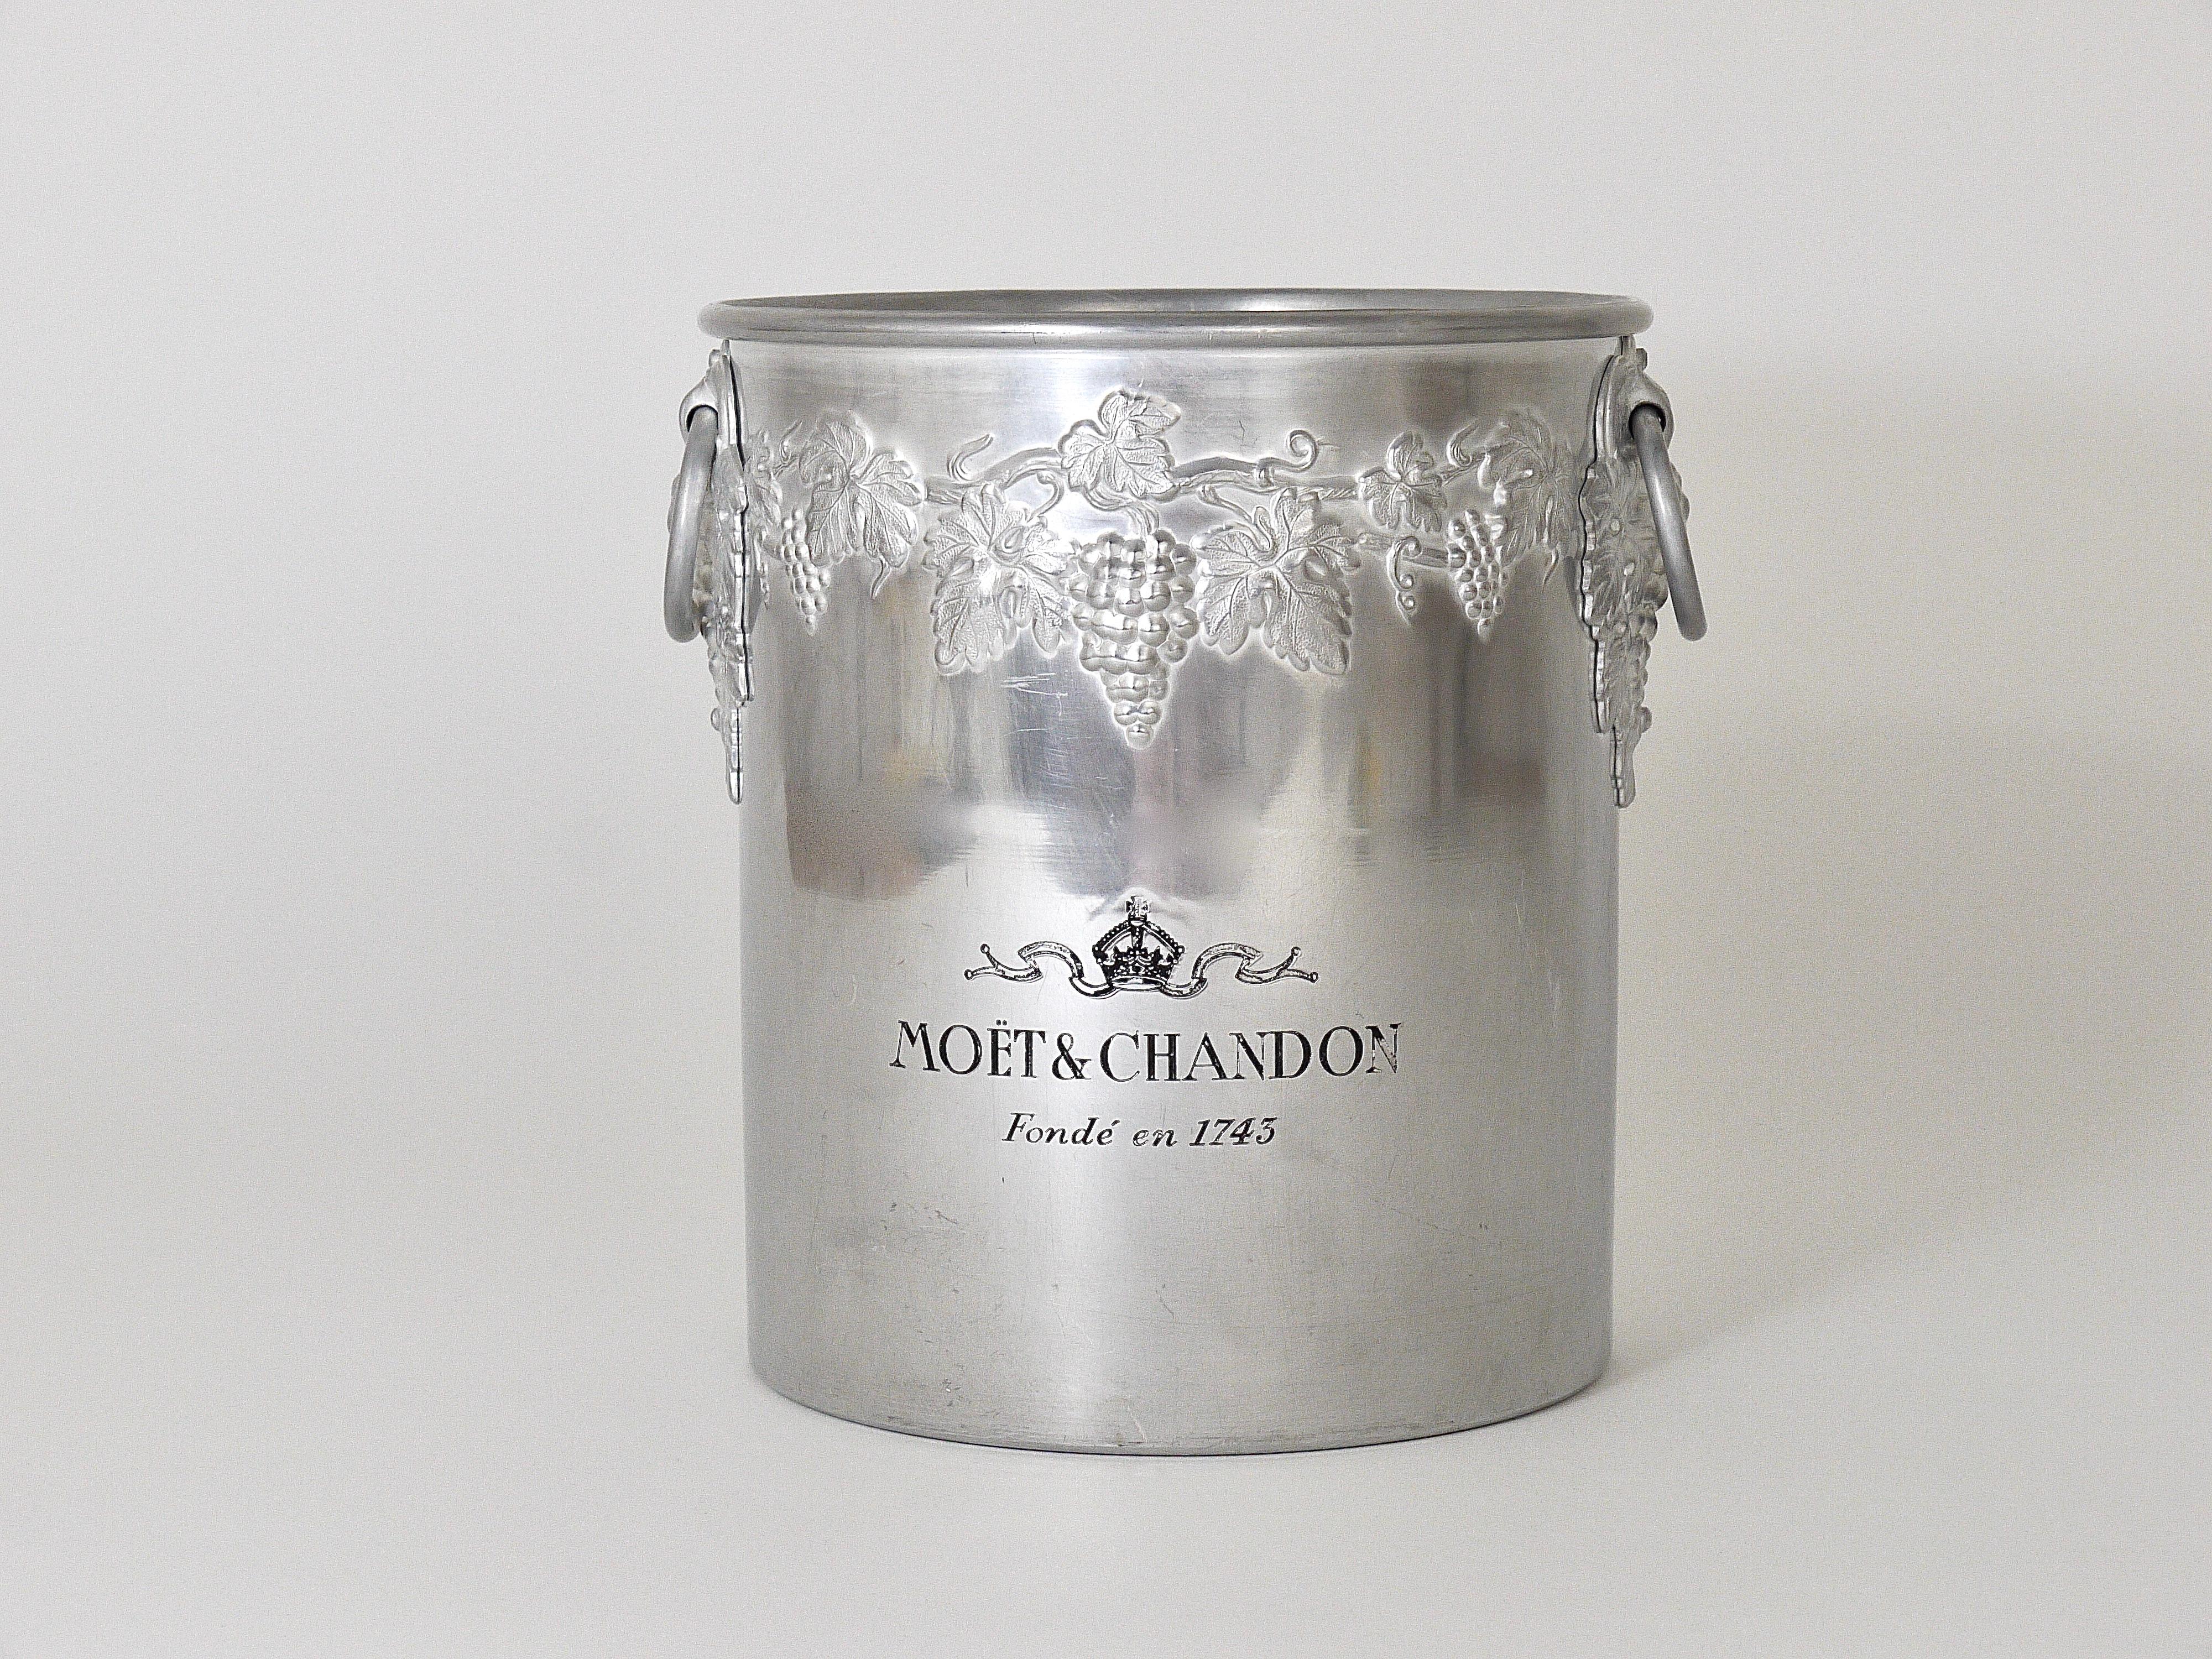 French Moet & Chandon Champagne Ice Bucket Bottle Cooler from the 1970s, France